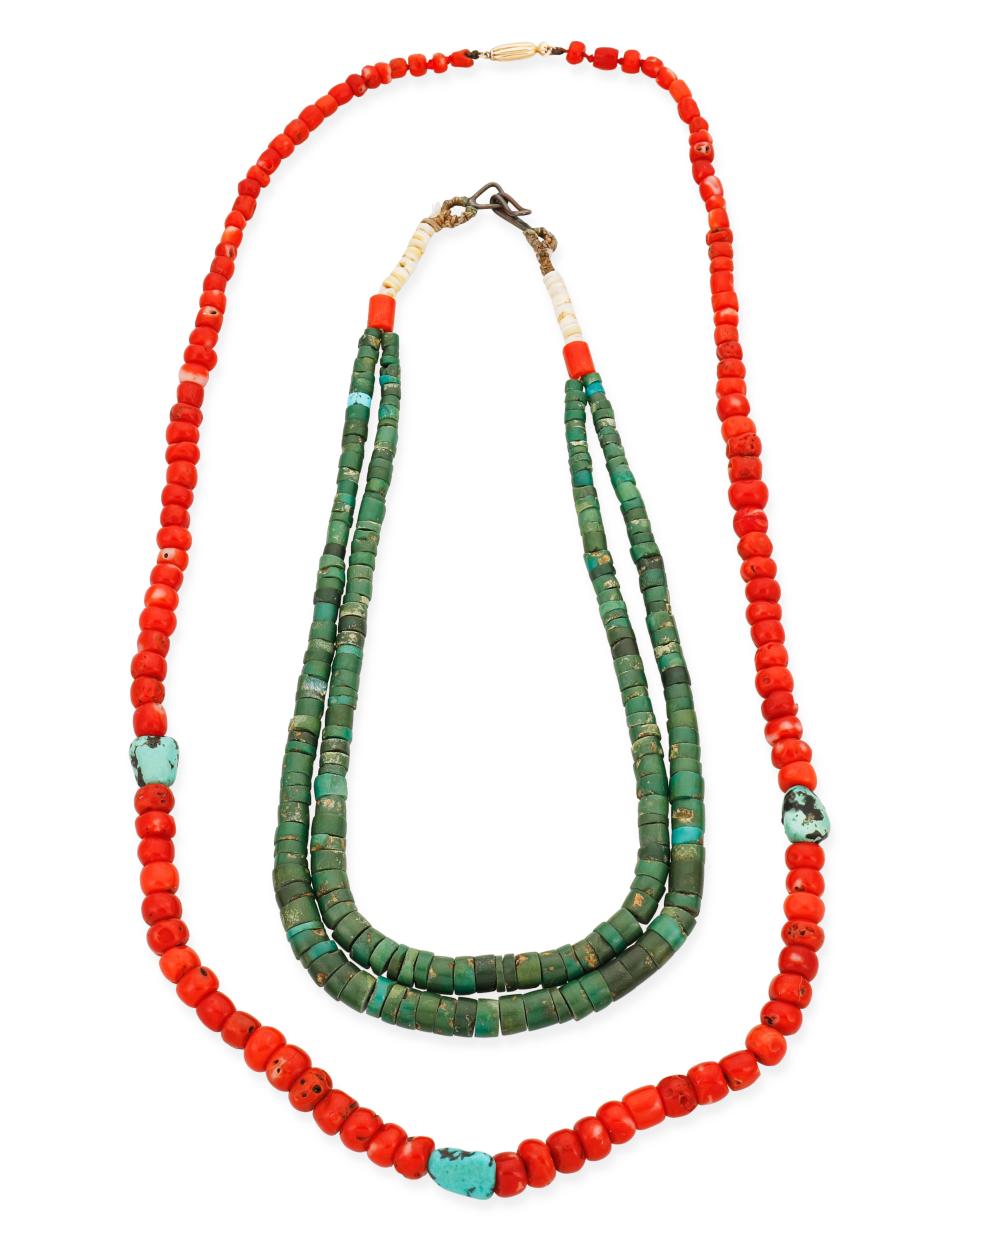 TWO PUEBLO-STYLE TURQUOISE AND